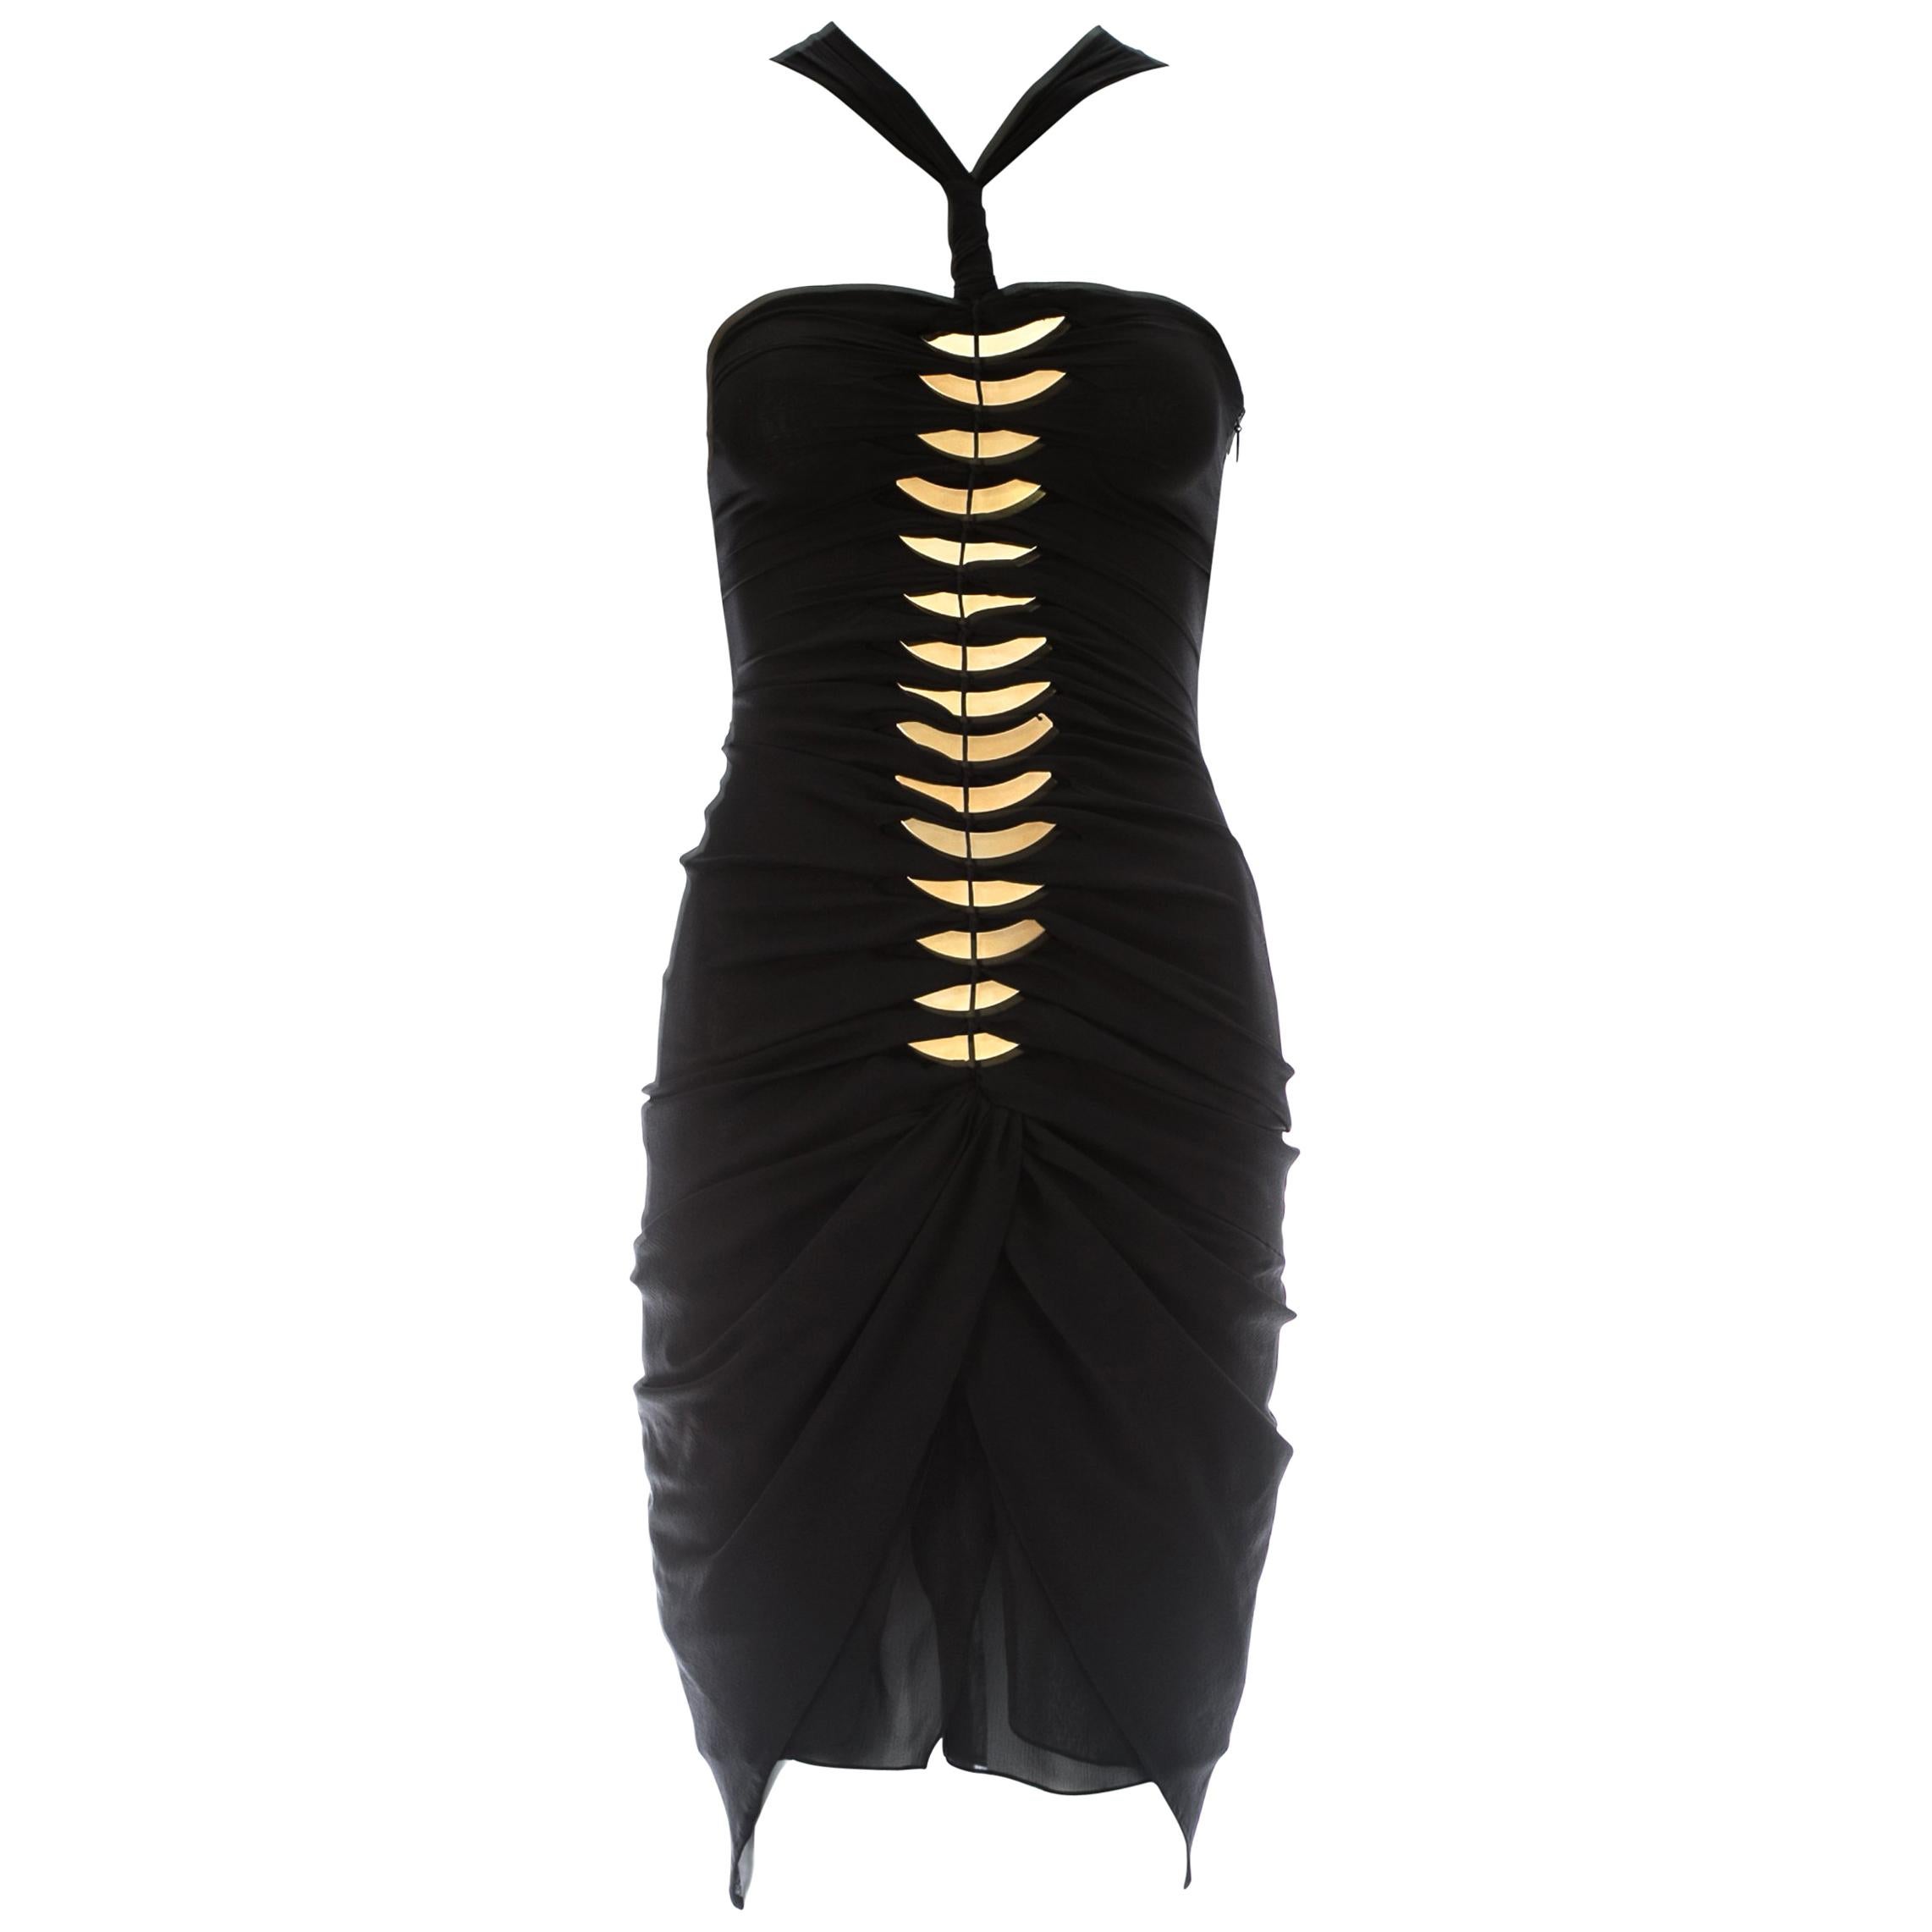 Tom Ford for Gucci black silk spandex mini dress with gold metal plates, c. 2004